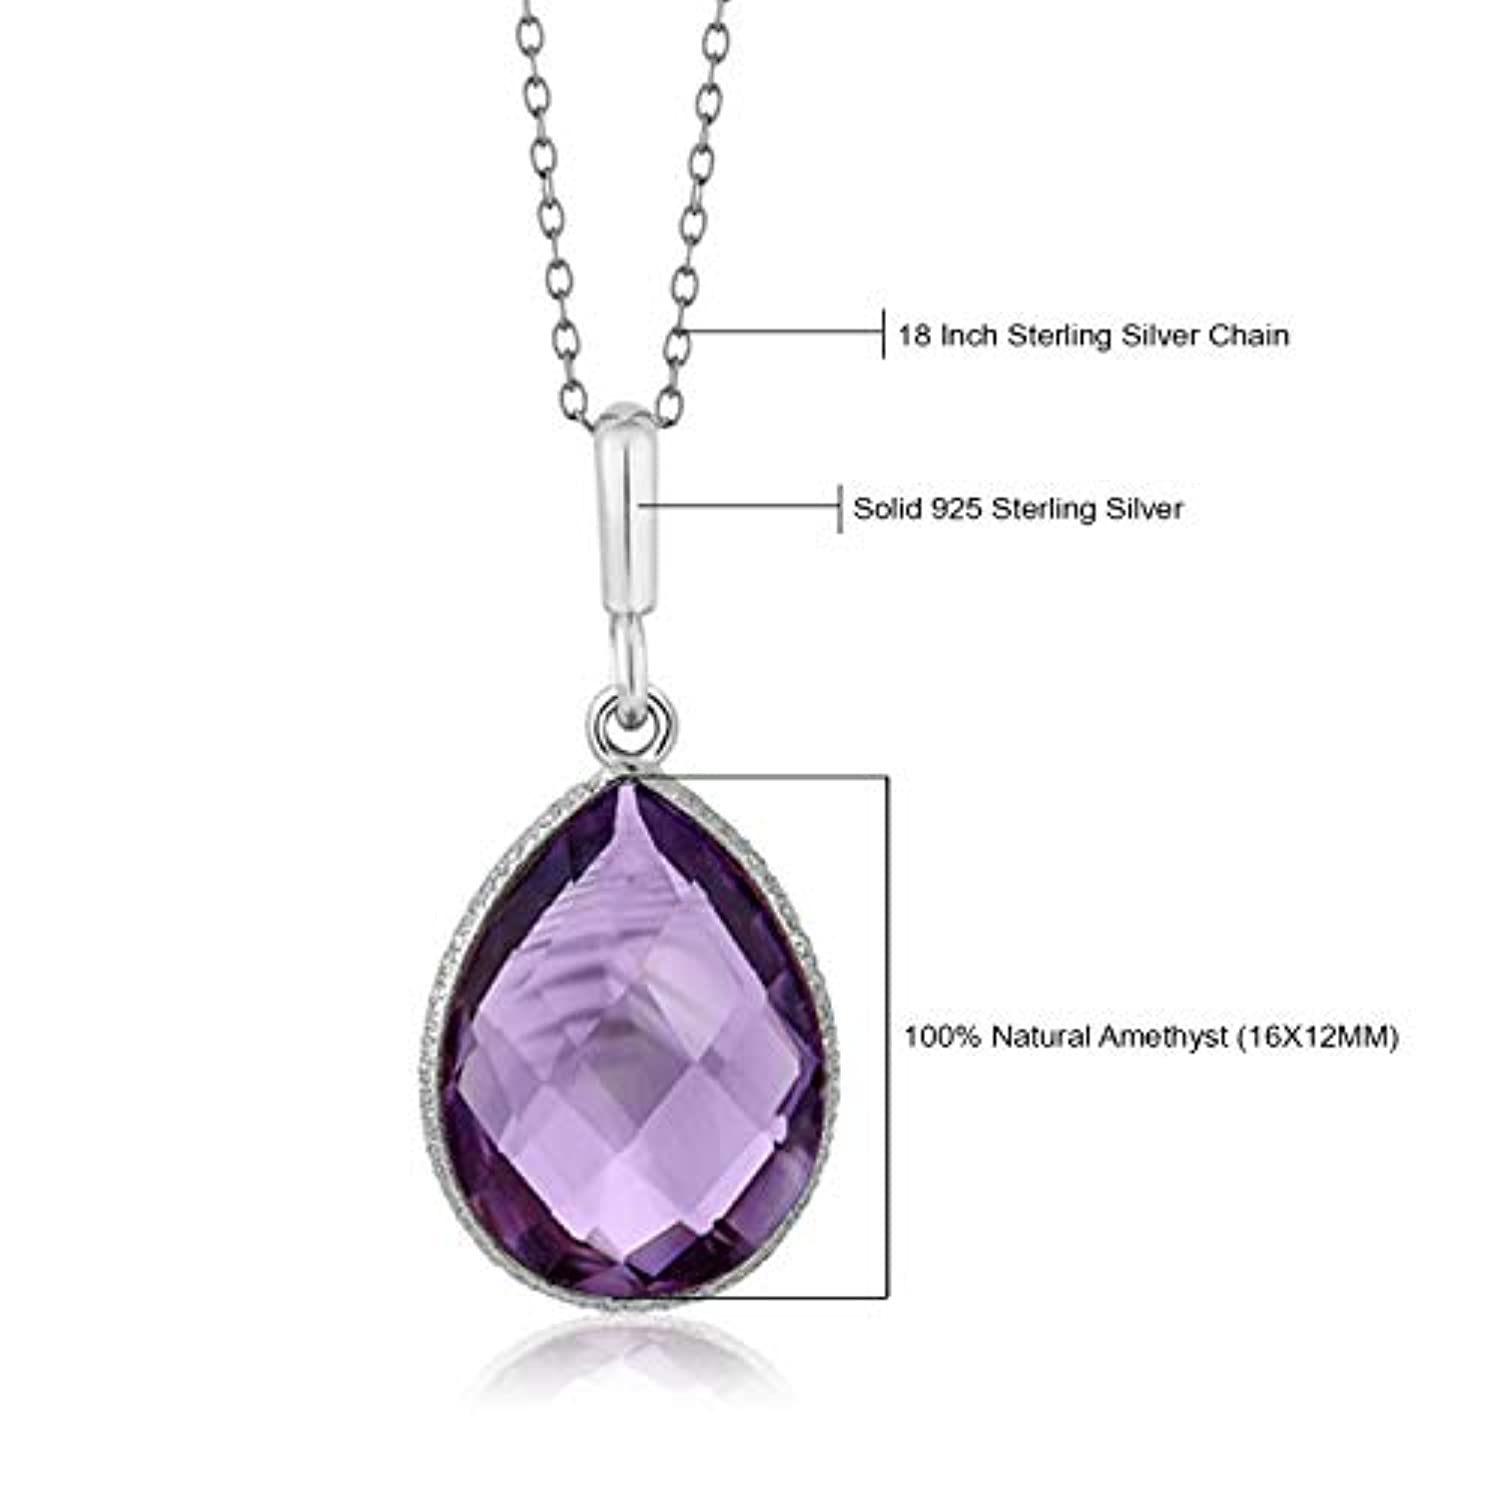 925 Sterling Silver Amethyst Pendant Necklace 6.50 Ct Pear Shape Gemstone Birthstone For Women with 18 Inch Silver Chain